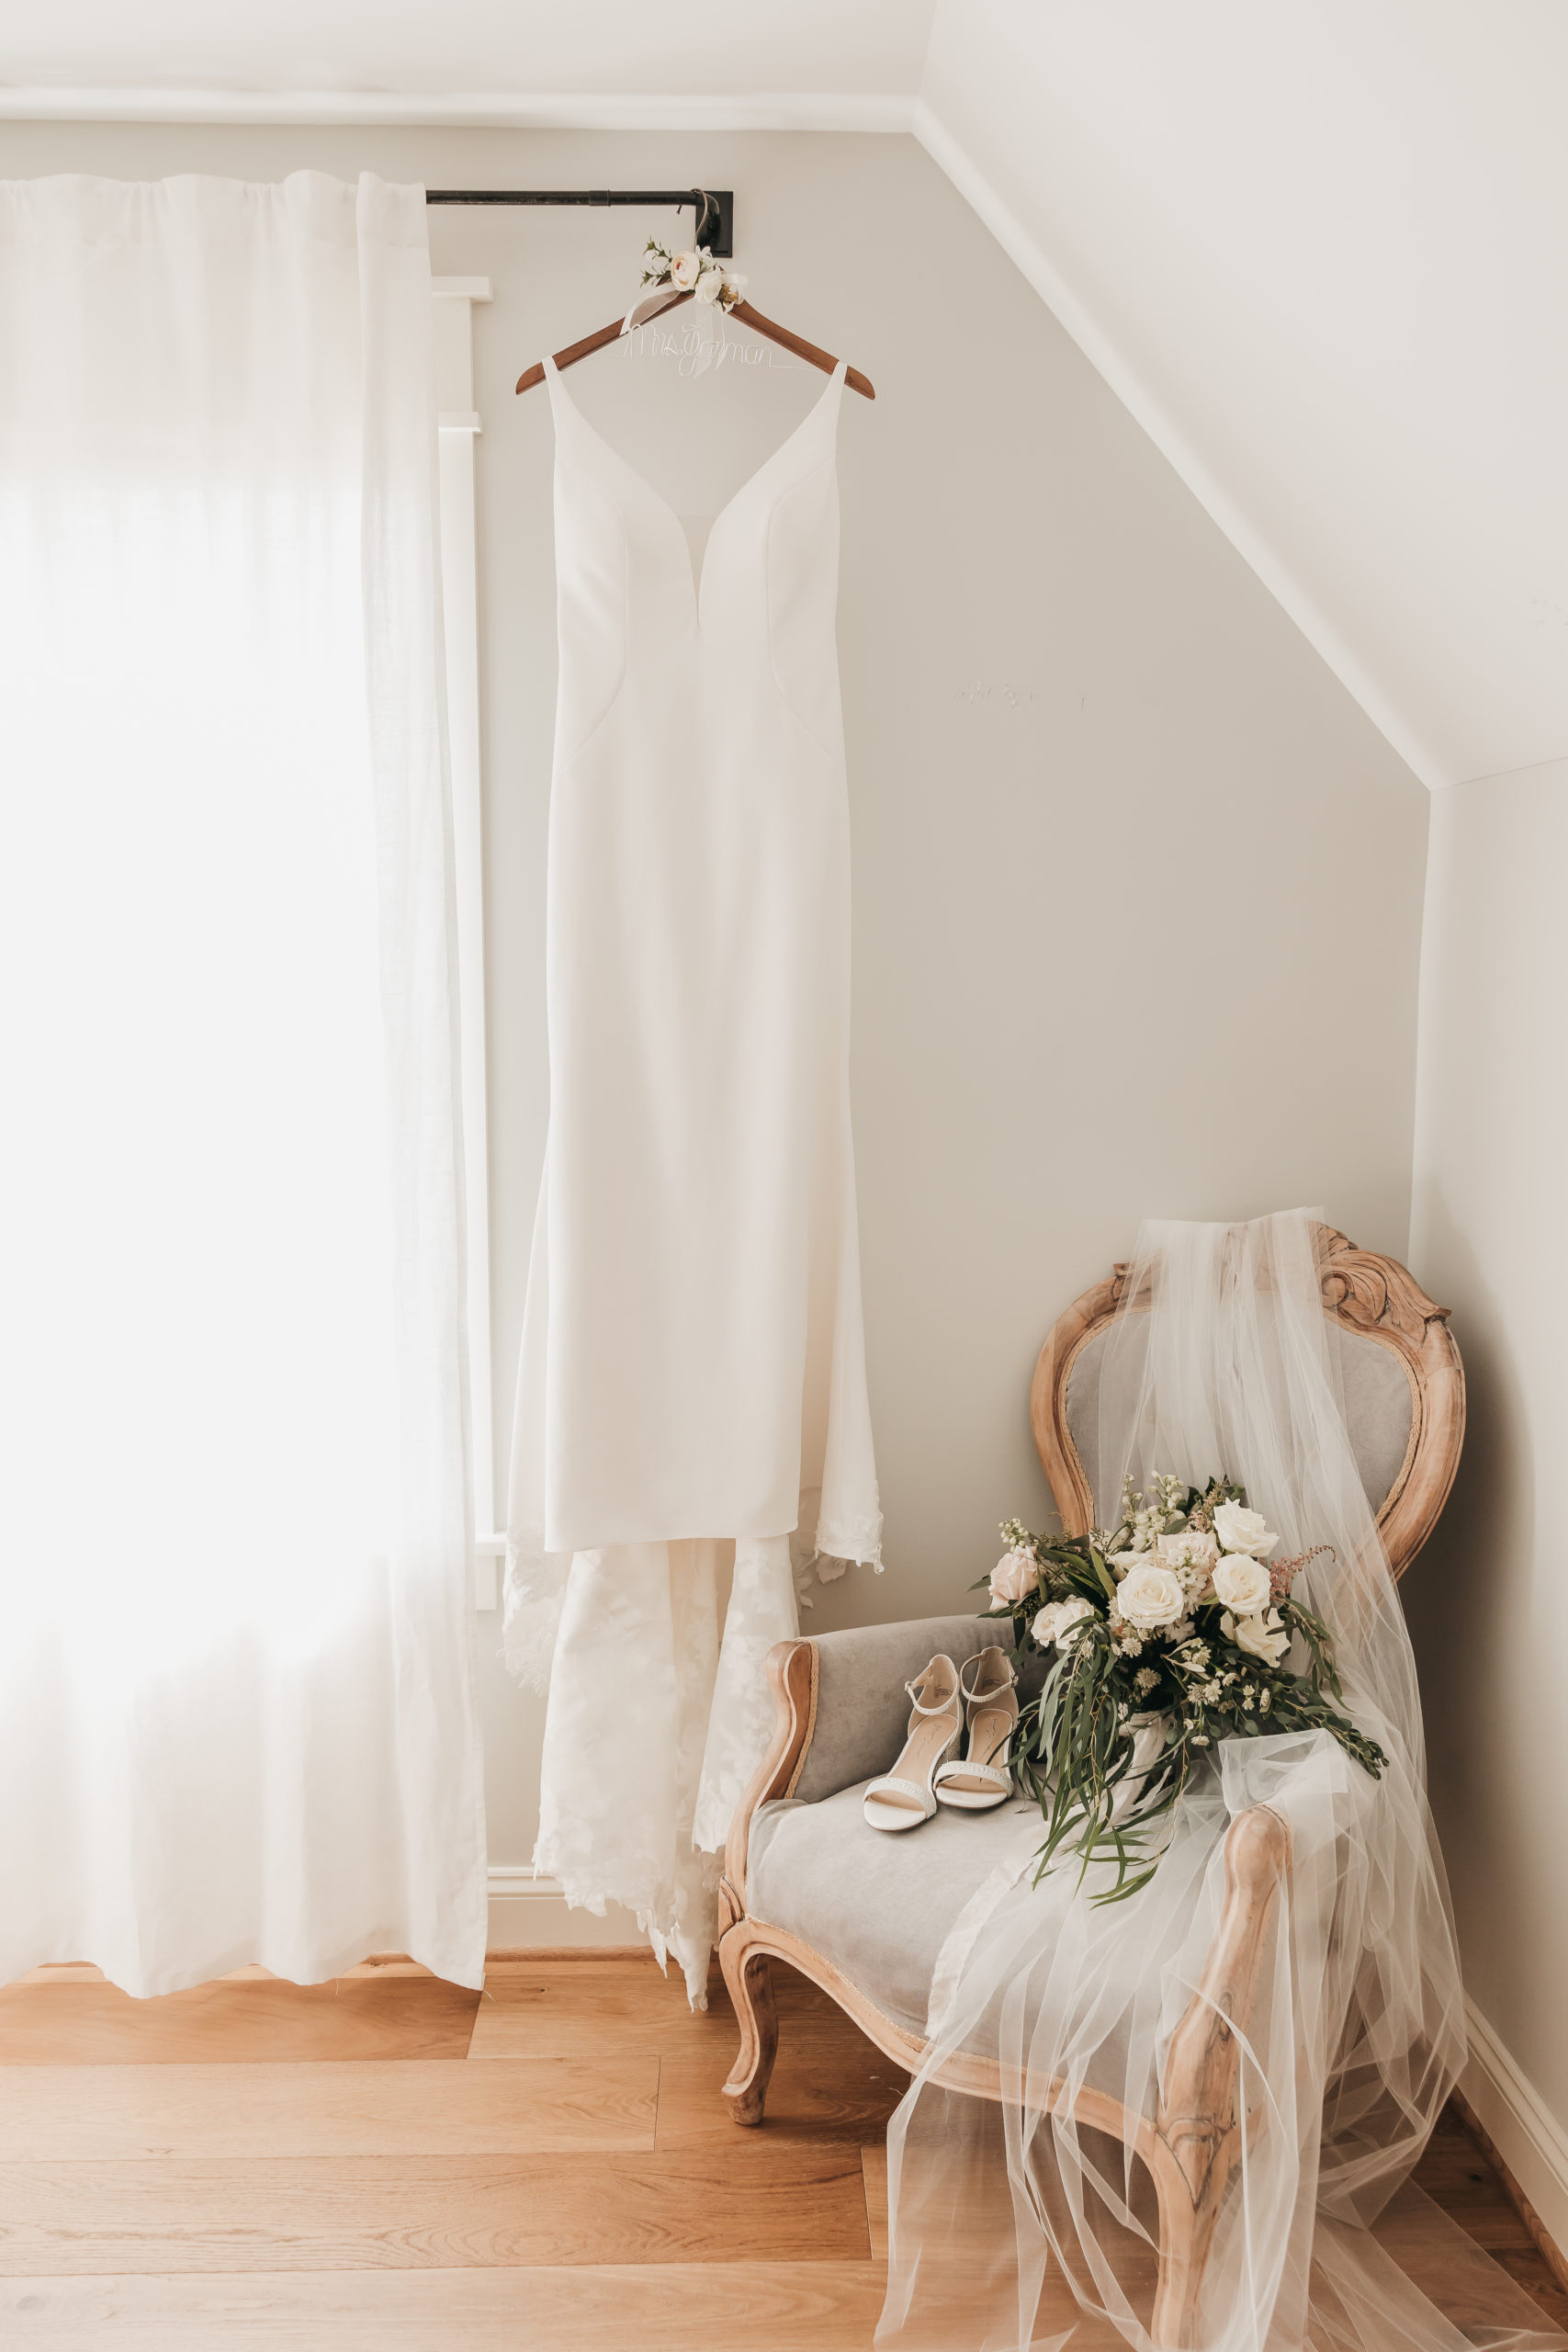 Bride's dress hung from curtain rod with veil, bouquet and shoes on chair beside it, taken by Rachel Yearick Photography